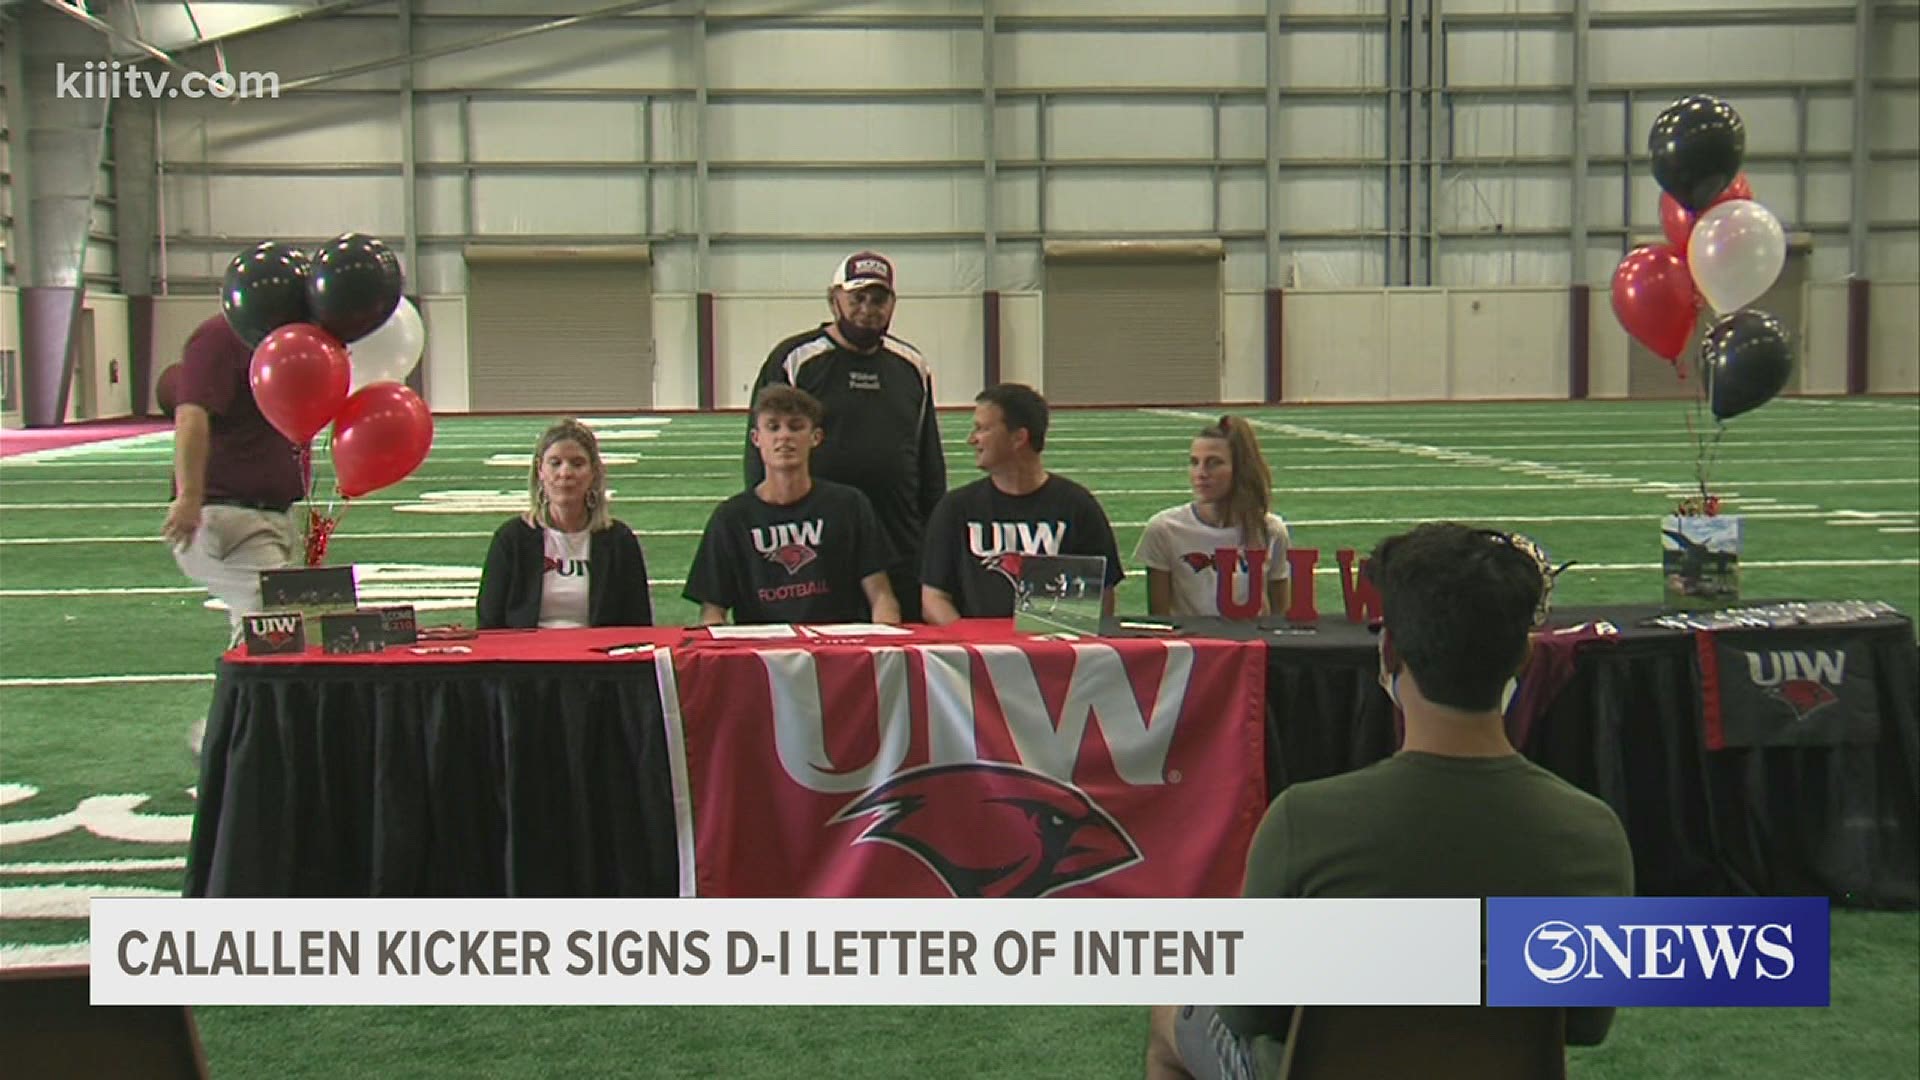 The Wildcats' kicker and punter Collin Kieschnick signed a letter of intent with Division I Incarnate Word.